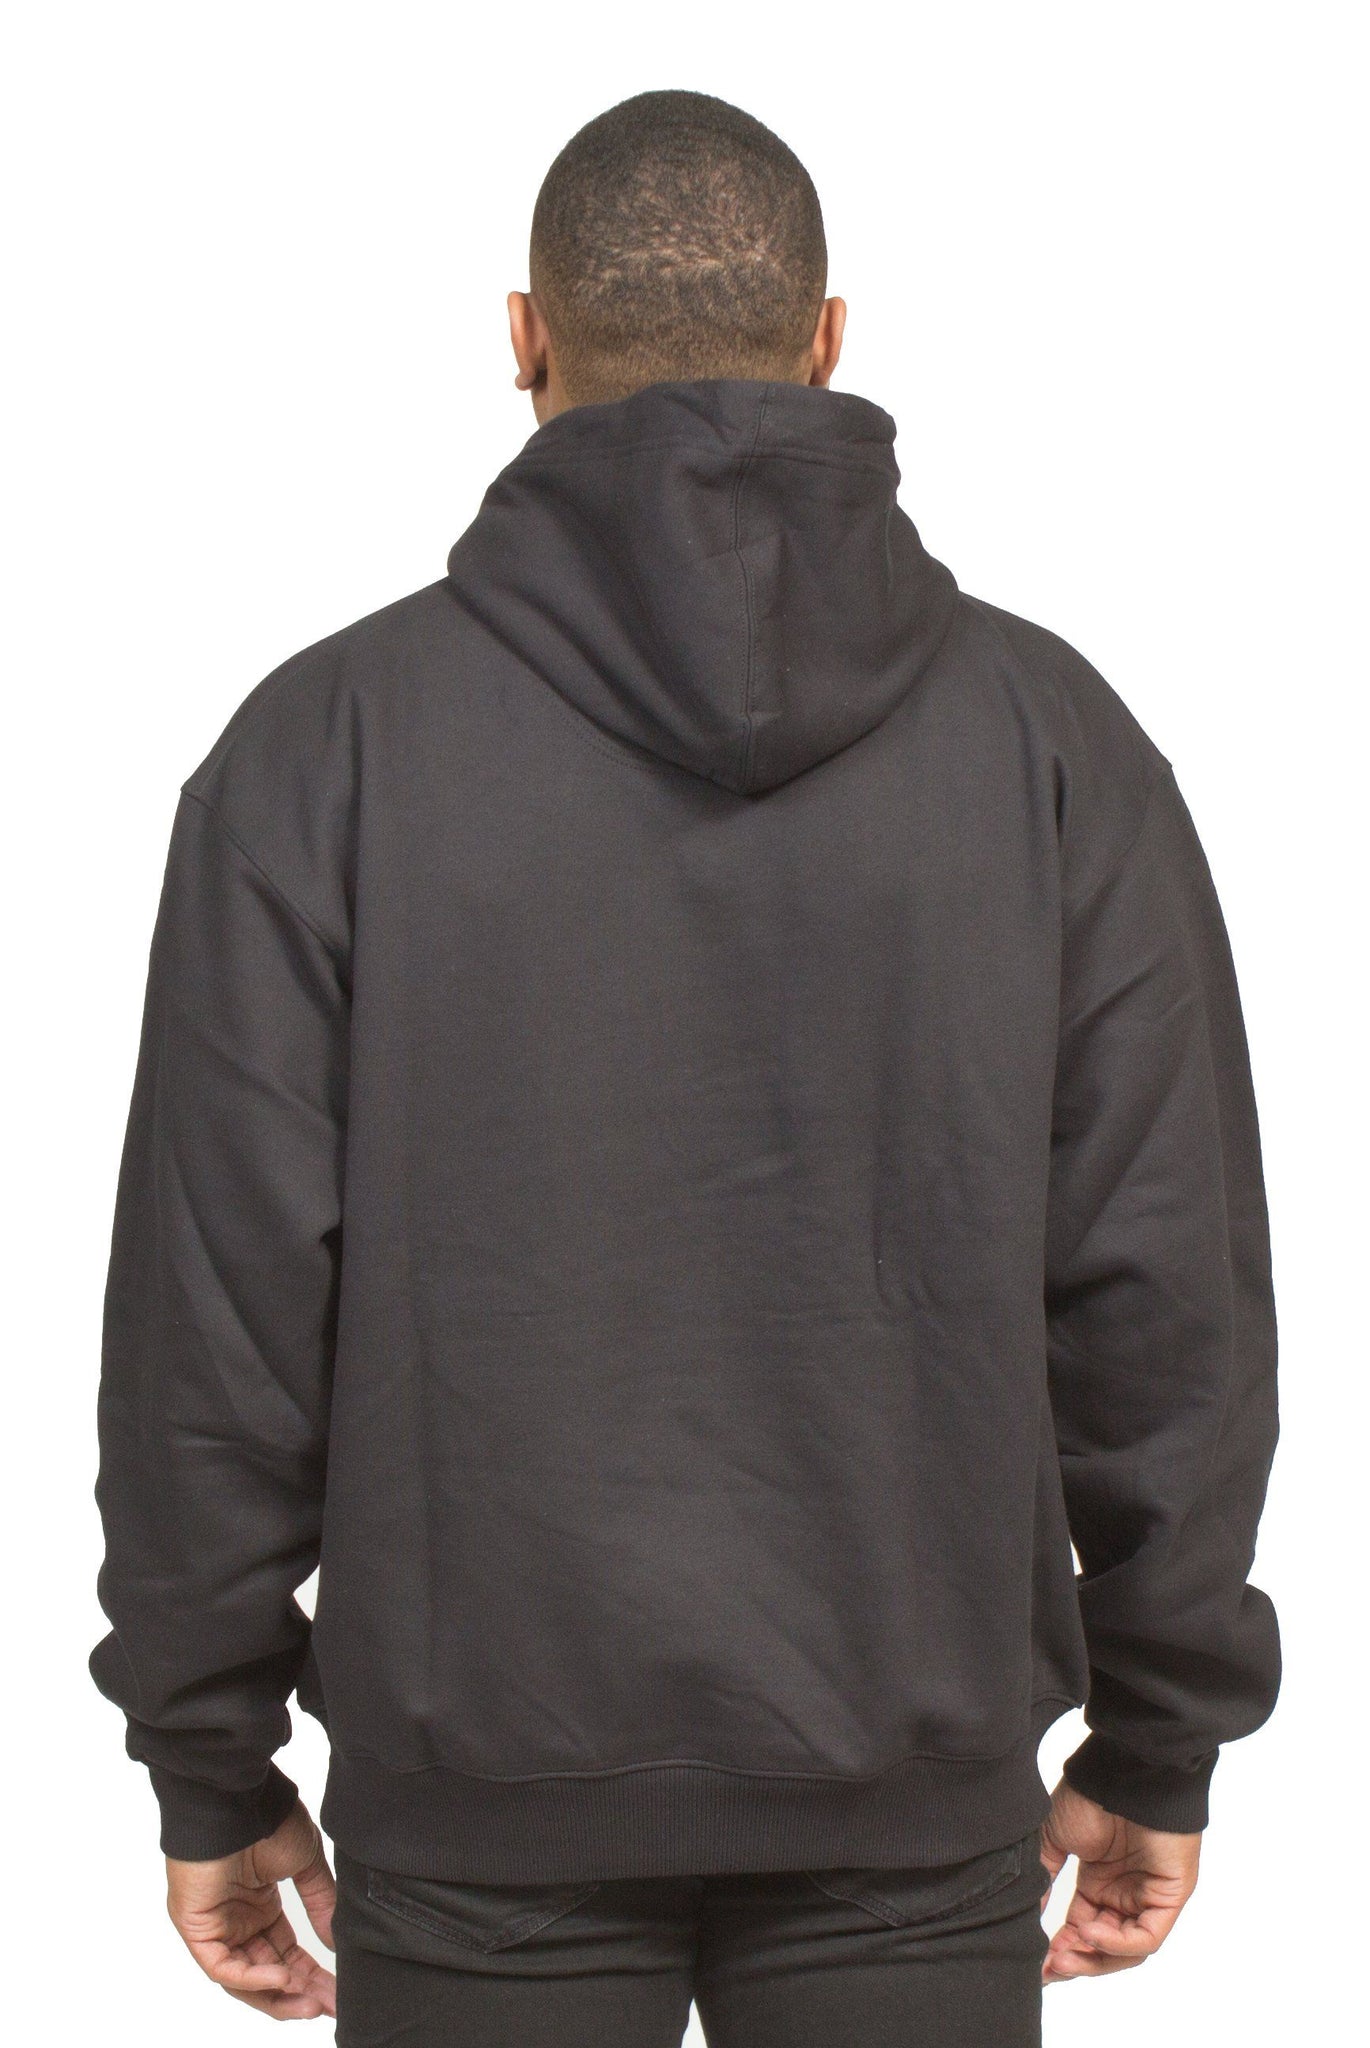 CHAMPION BIG FACE PLRB OVERSIZED HOODIE IN BLACK | Poor Little Rich Boy Clothing